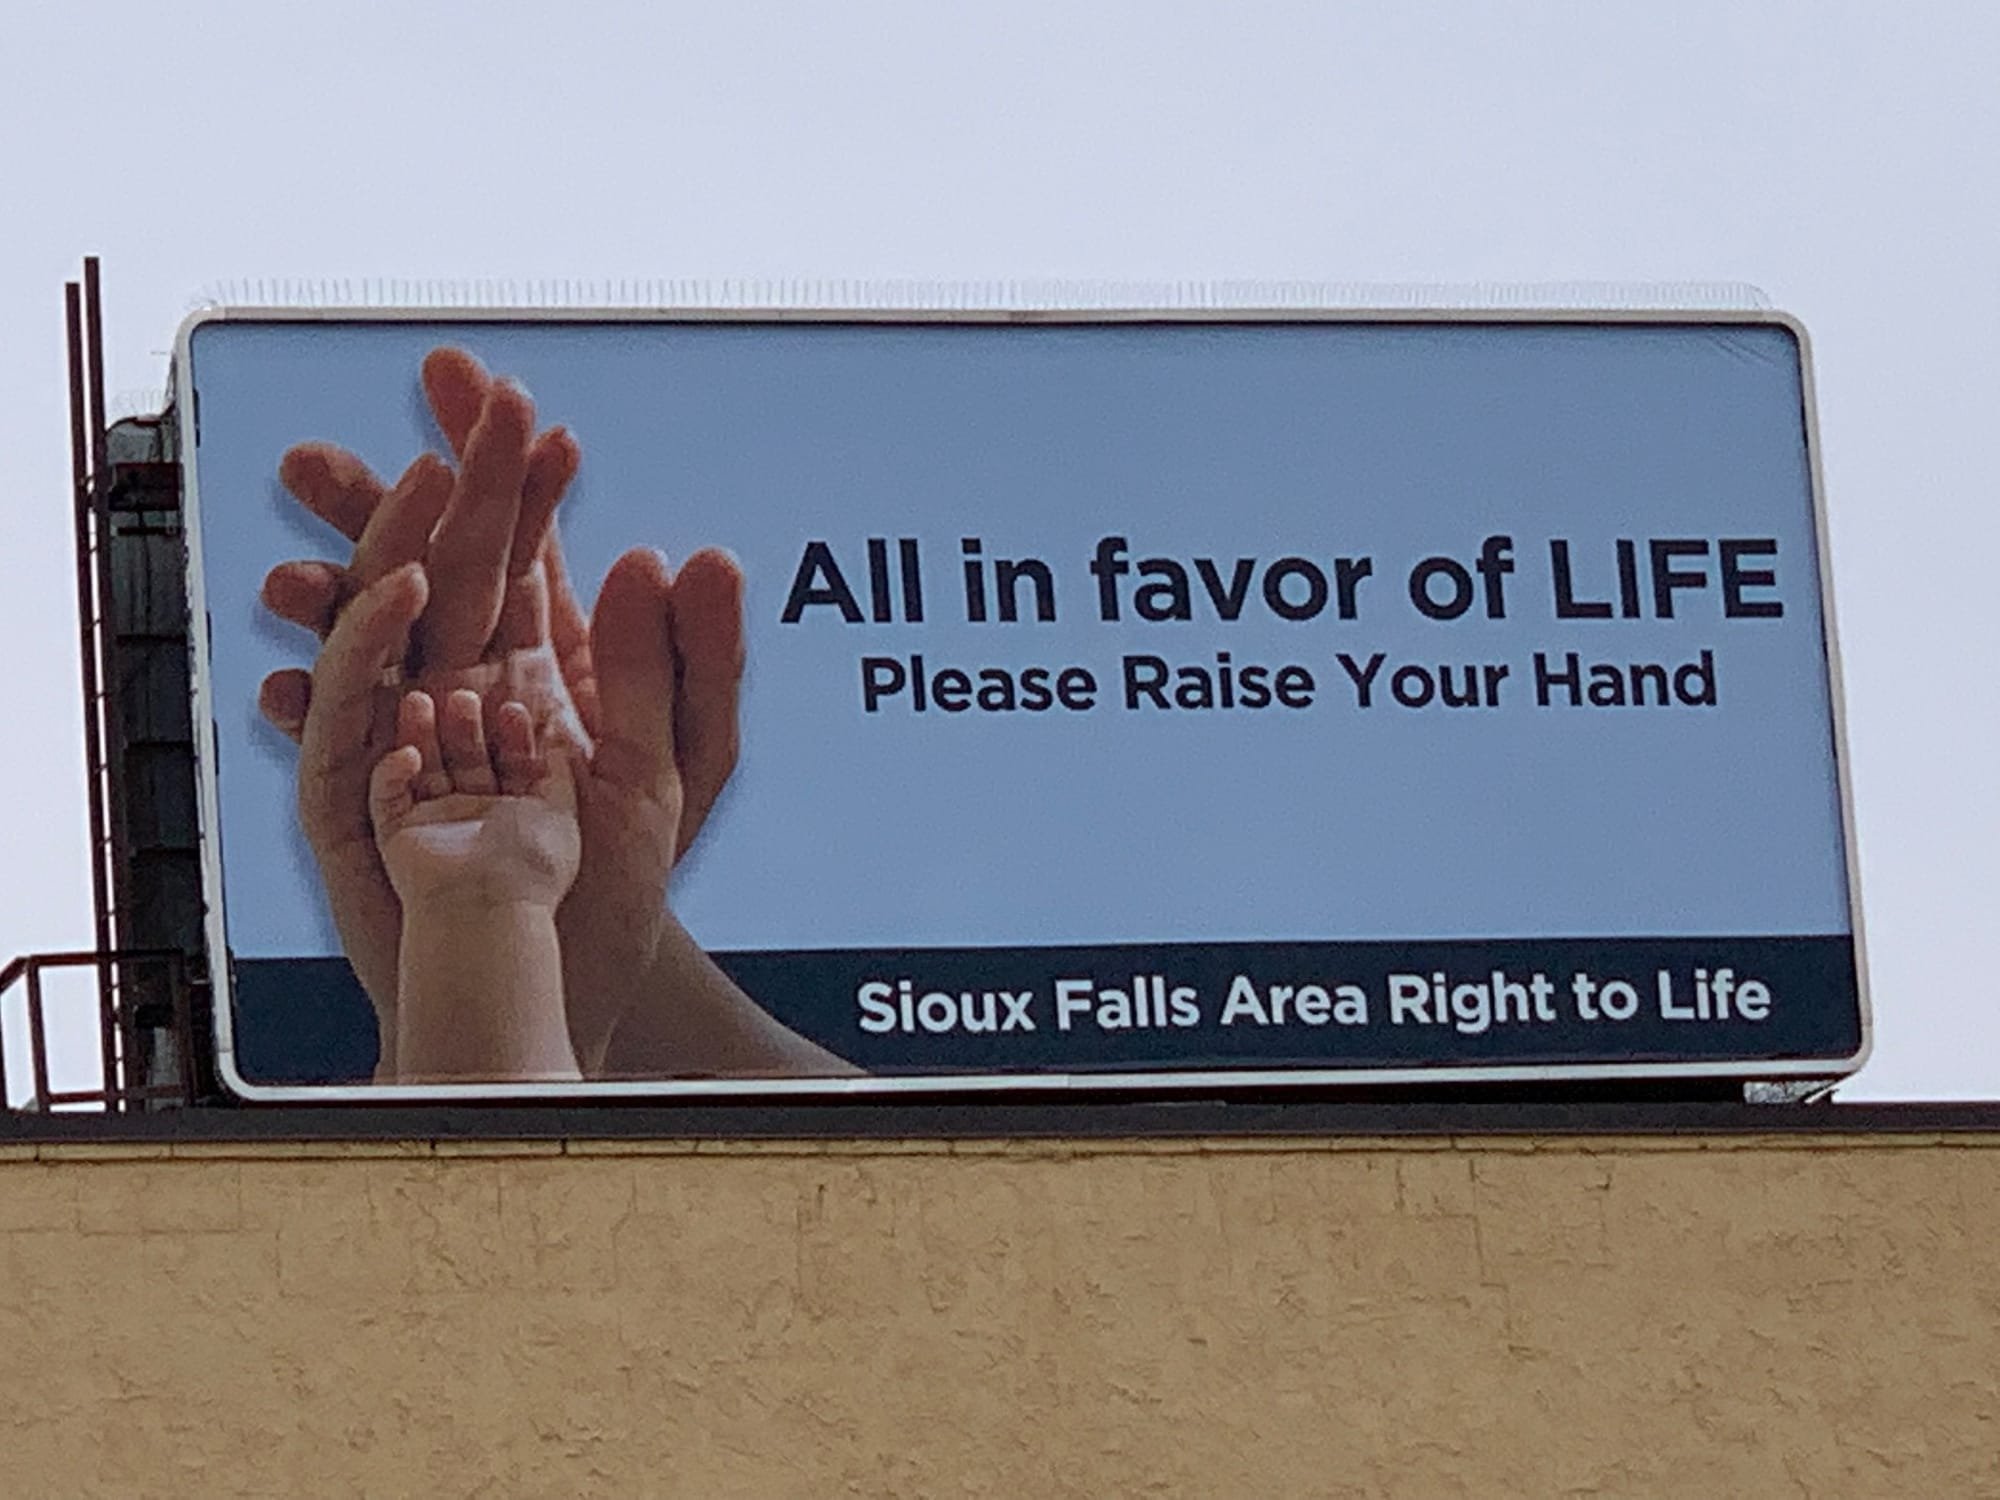 Minnesota Ave - Designed by Sioux Falls Area Right to Life